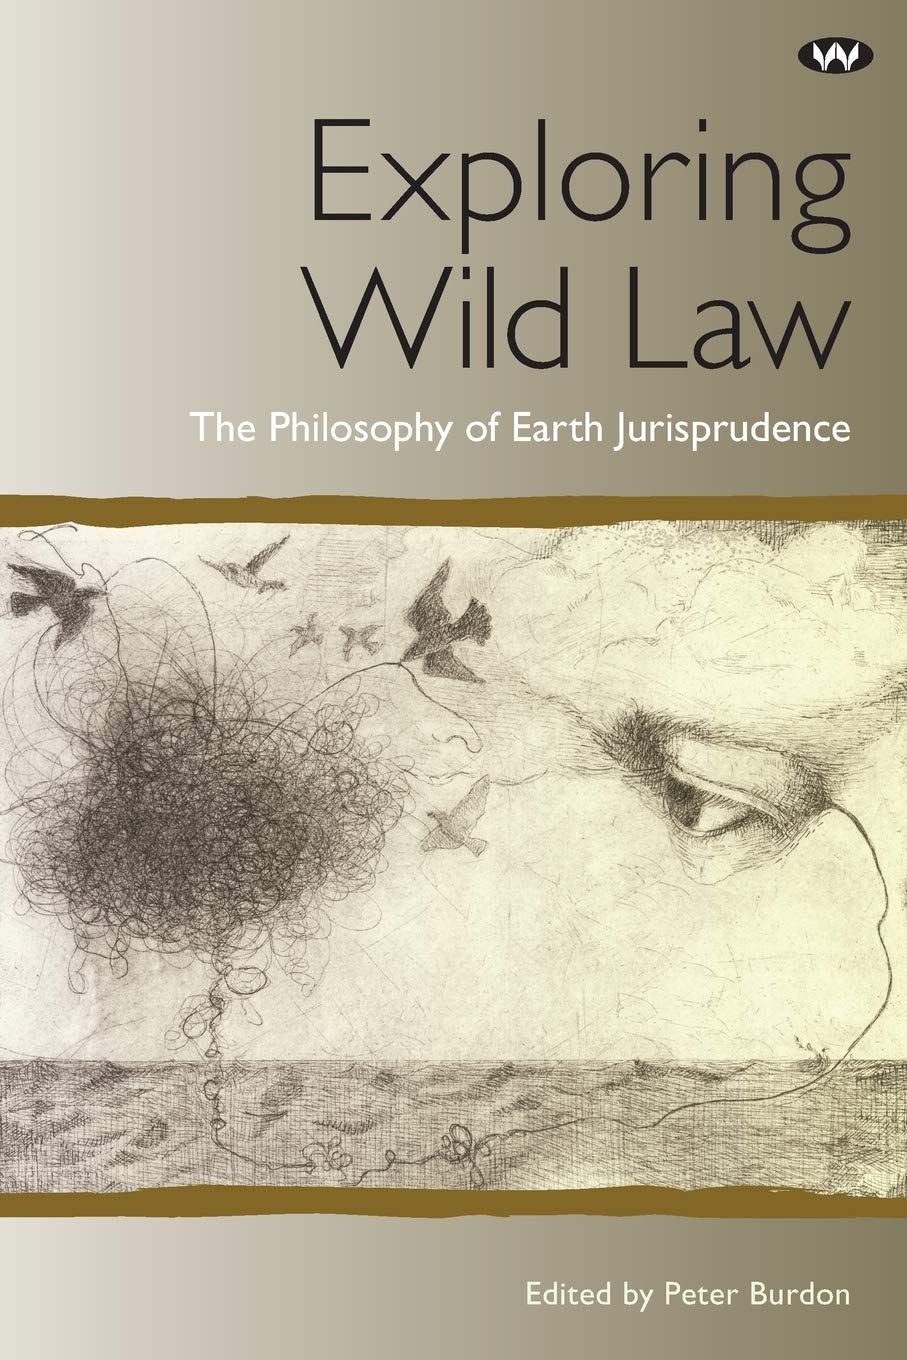 Exploring Wild Law, The Philosophy of Earth Jurisprudence